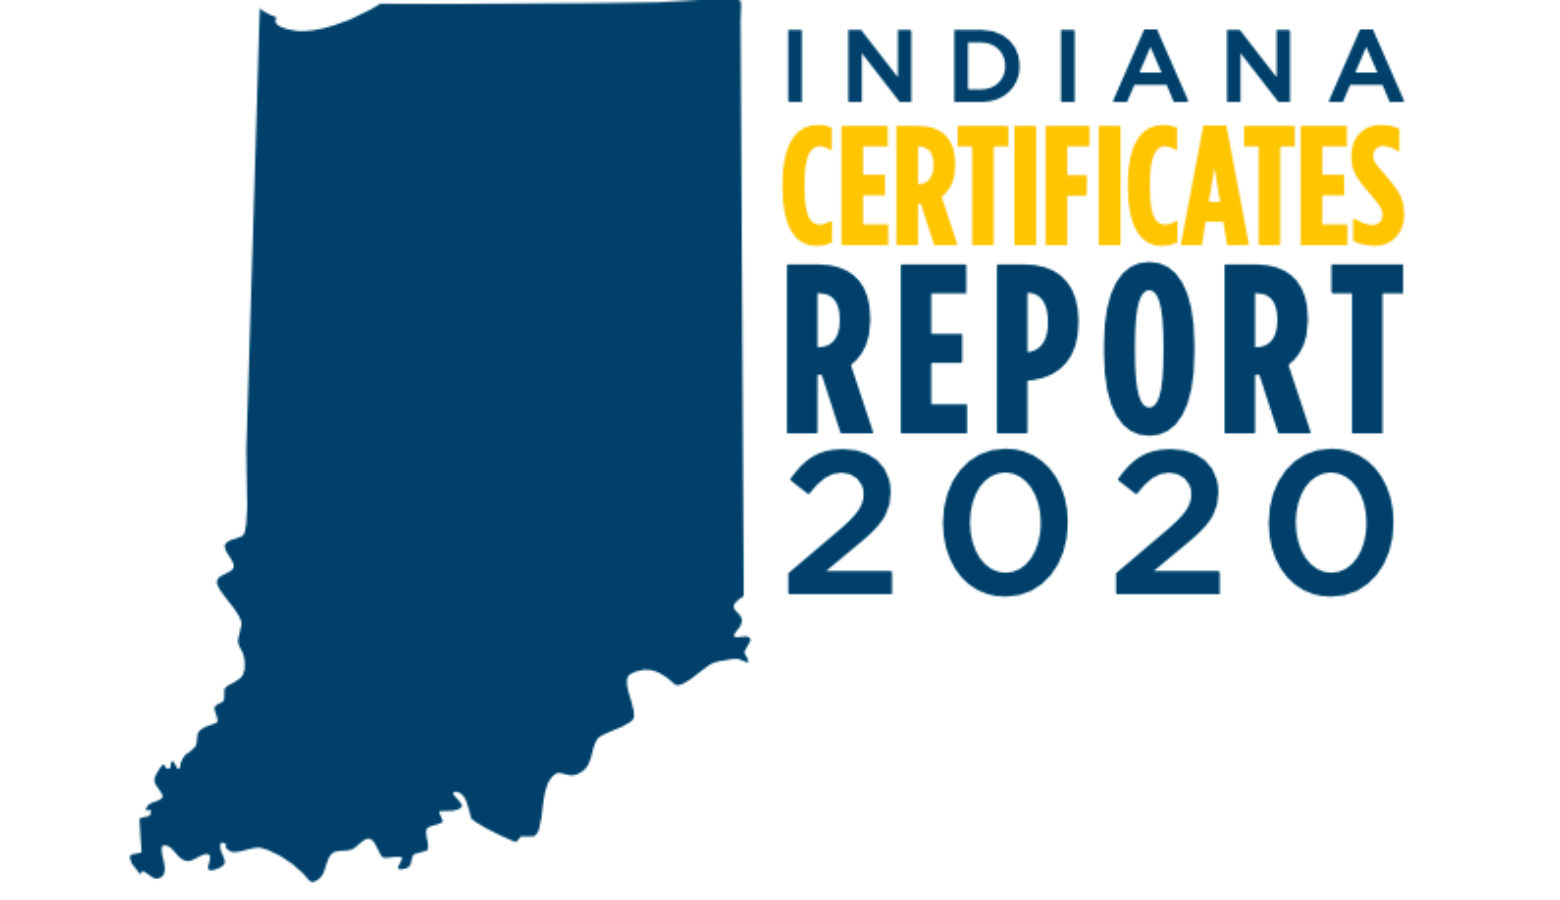 Five times as many Hoosiers got a certificate last year compared to a decade ago. (Indiana Certificates Report 2020)